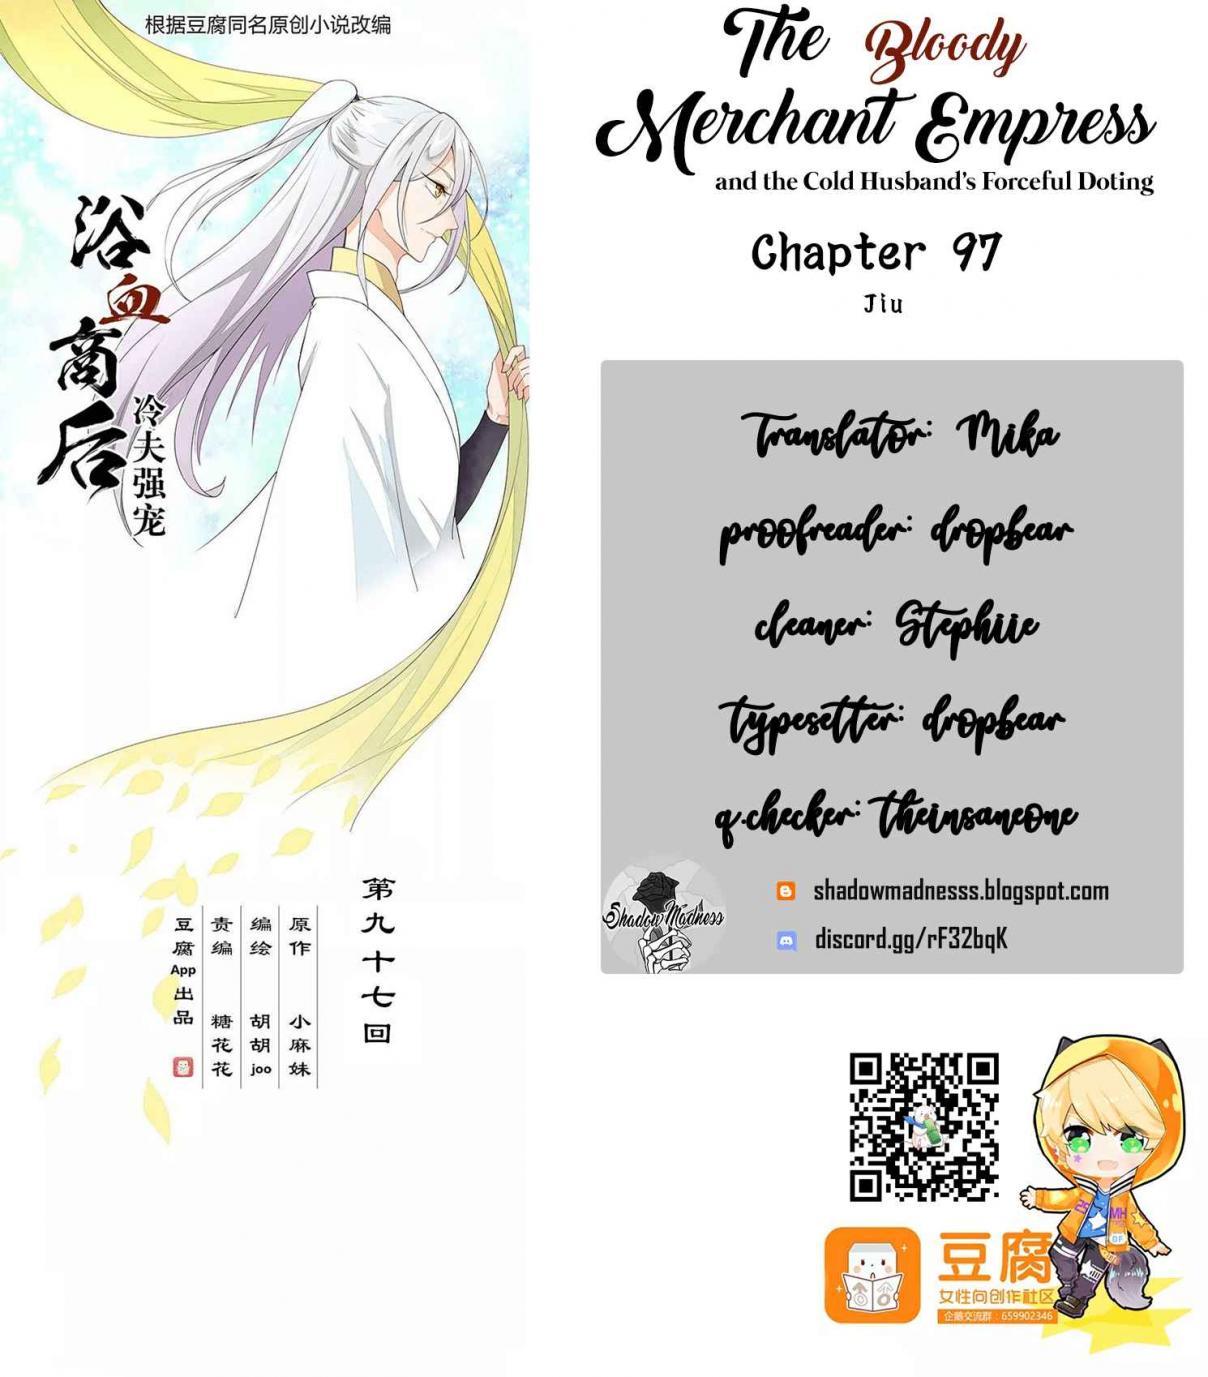 The Bloody Merchant Empress and the Cold Husband's Forceful Doting Ch. 97 Jiu